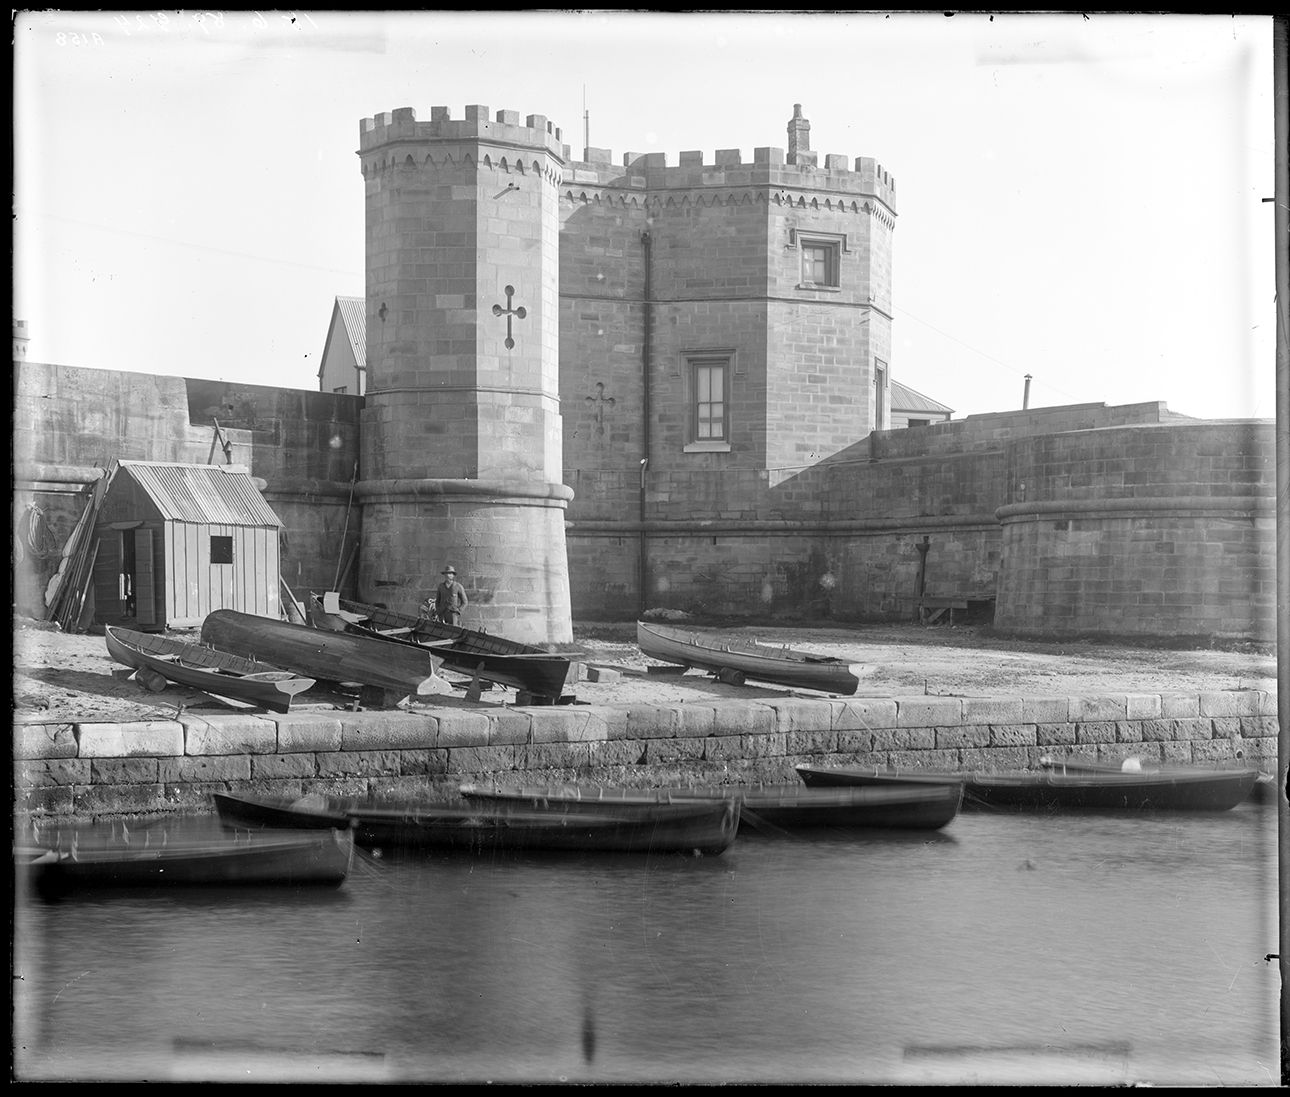 Fort Macquarie, a man stand at boats moored in front of the building